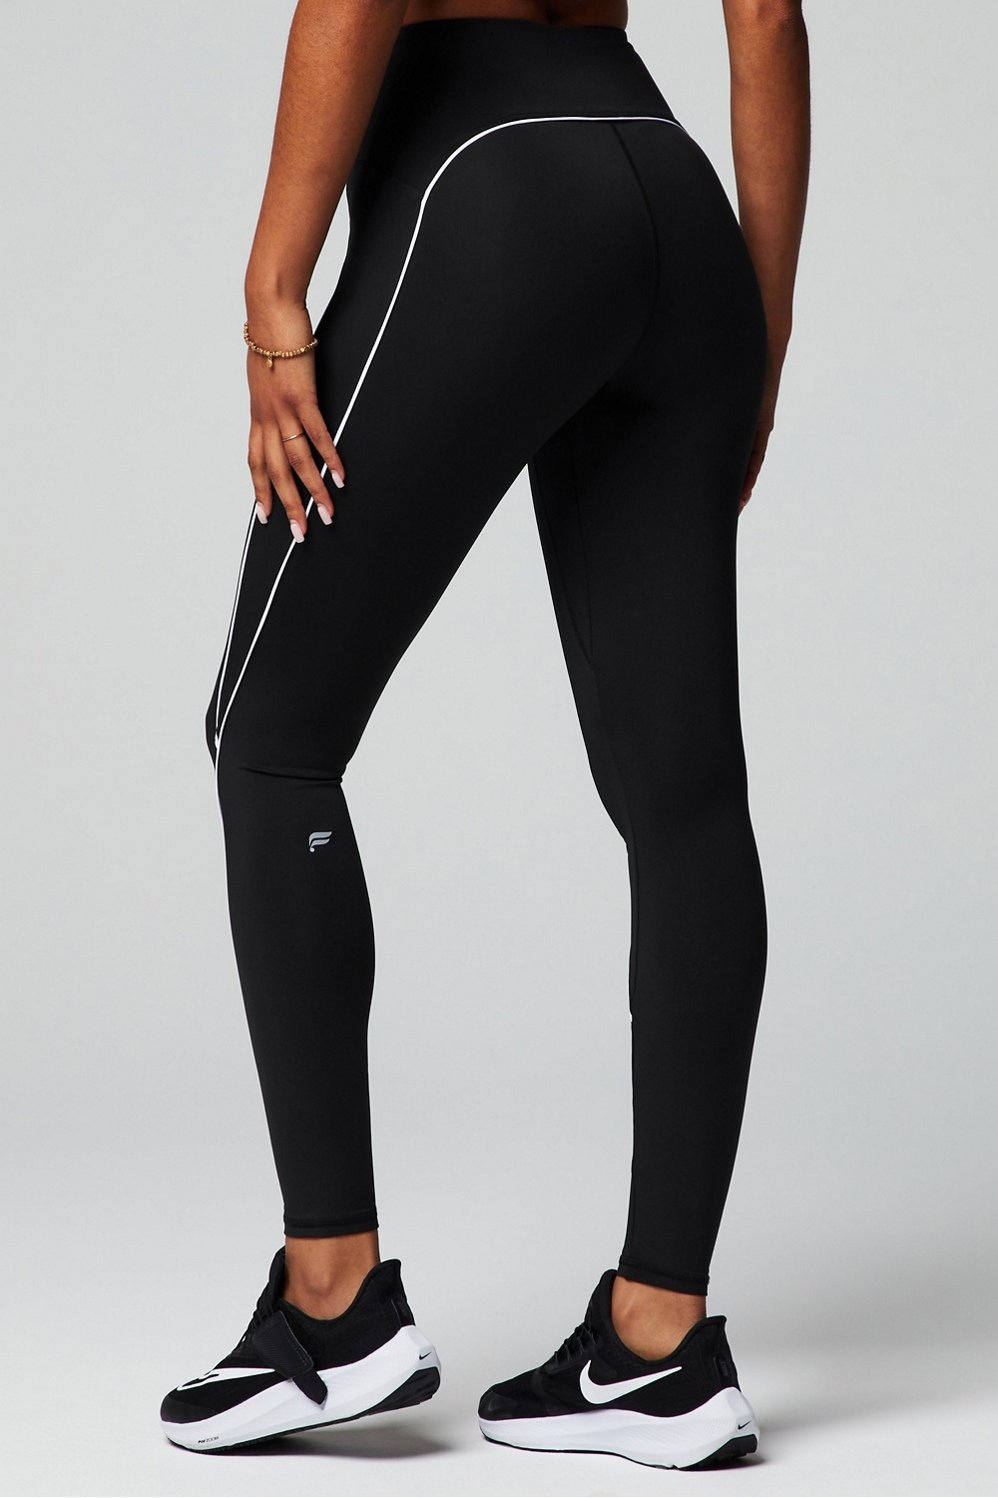 Anywhere Motion365+ High-Waisted Piped Legging - Fabletics